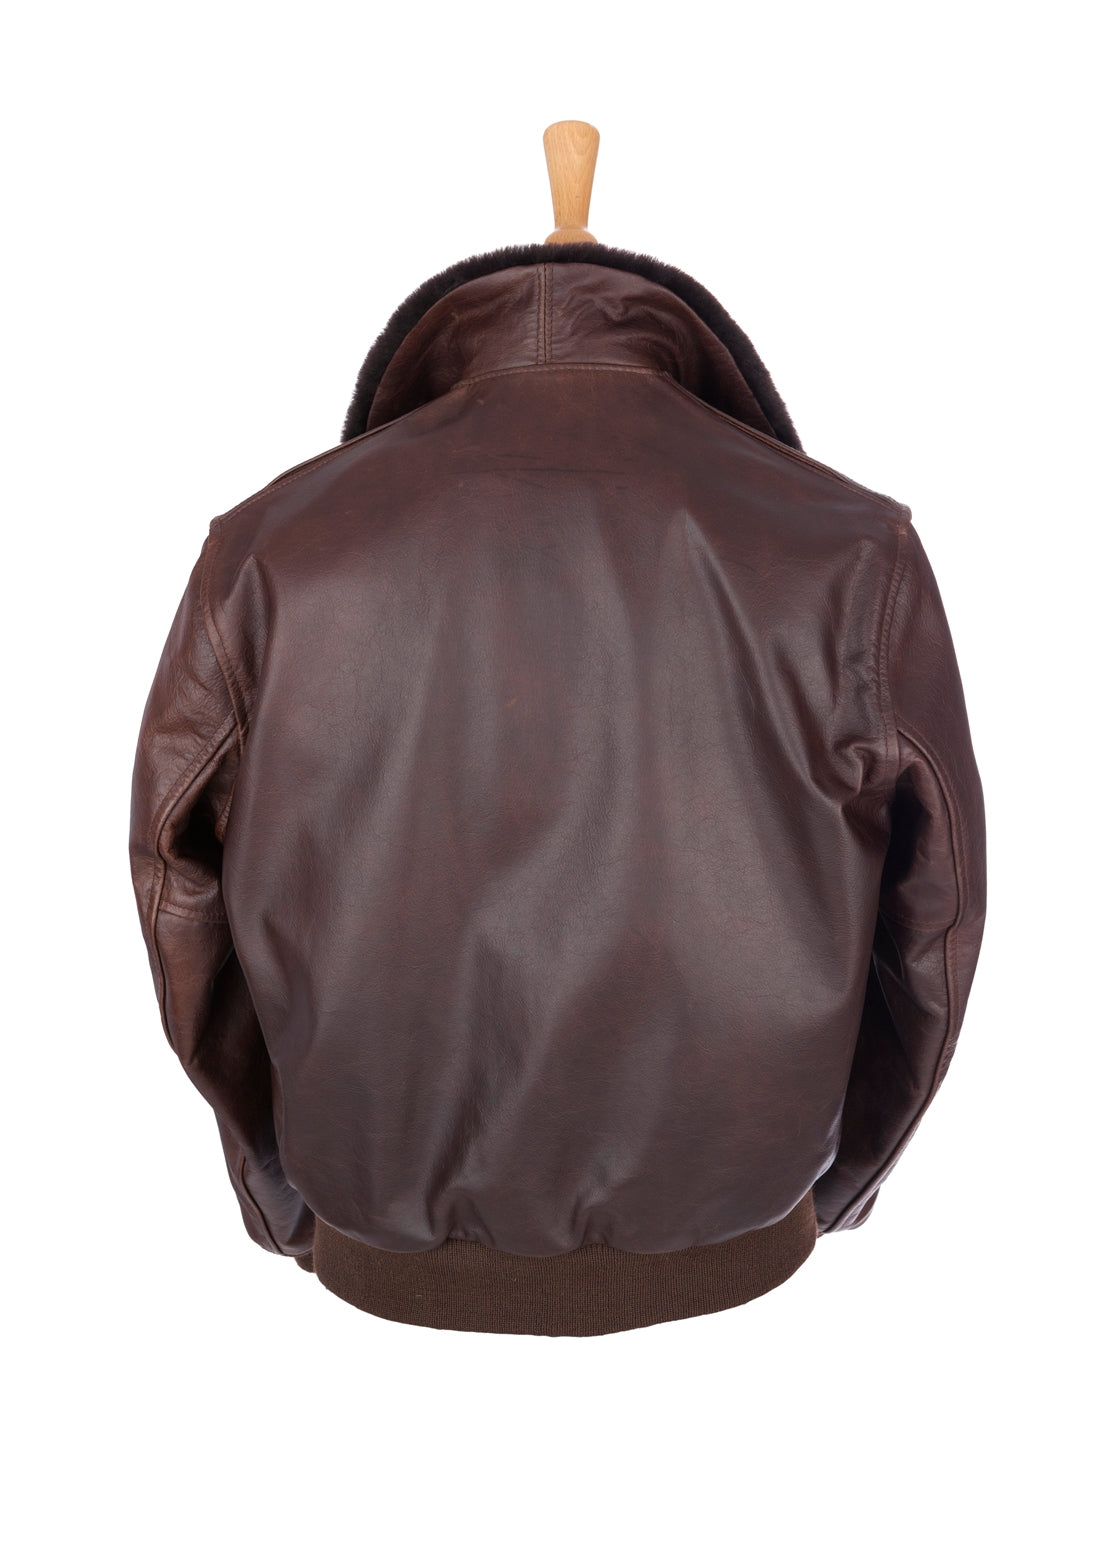 Regent and Aero Leather - A2 Bomber Jacket - Brown Steerhide - Regent Tailoring